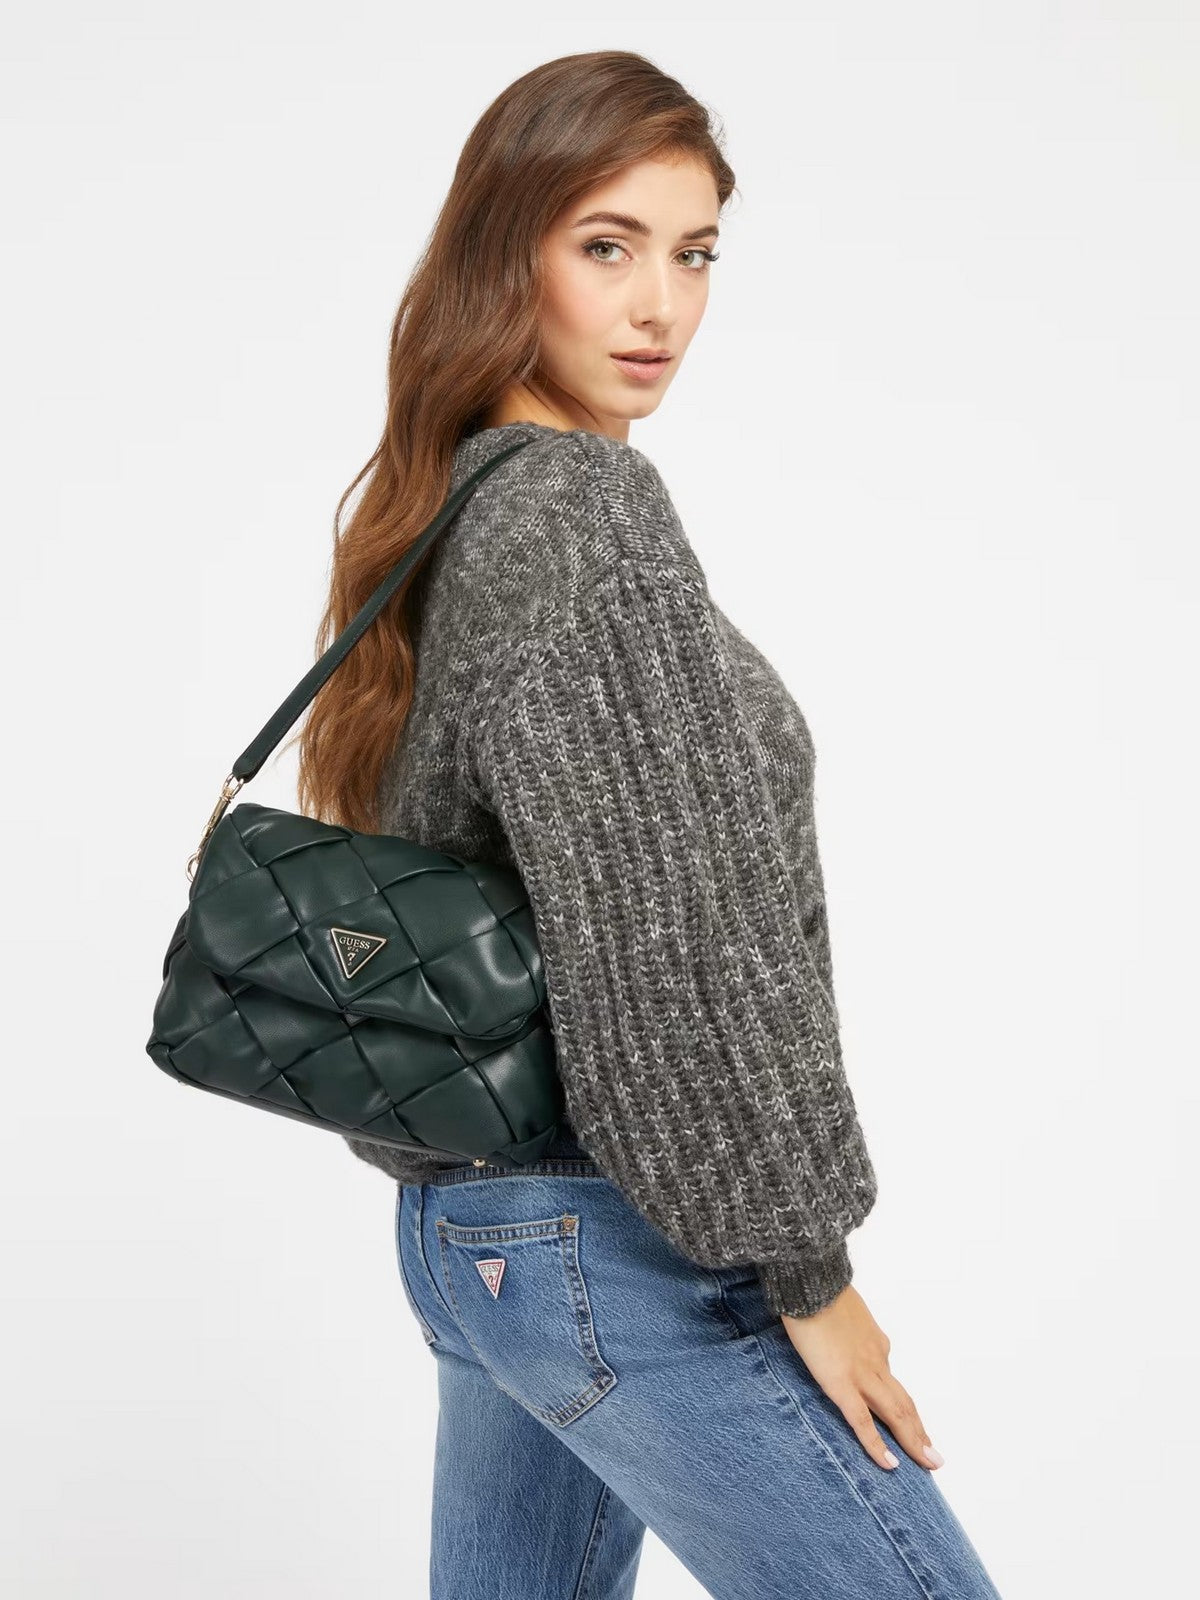 GUESS Sac pour femmes HWWG89 86190 FOR Green